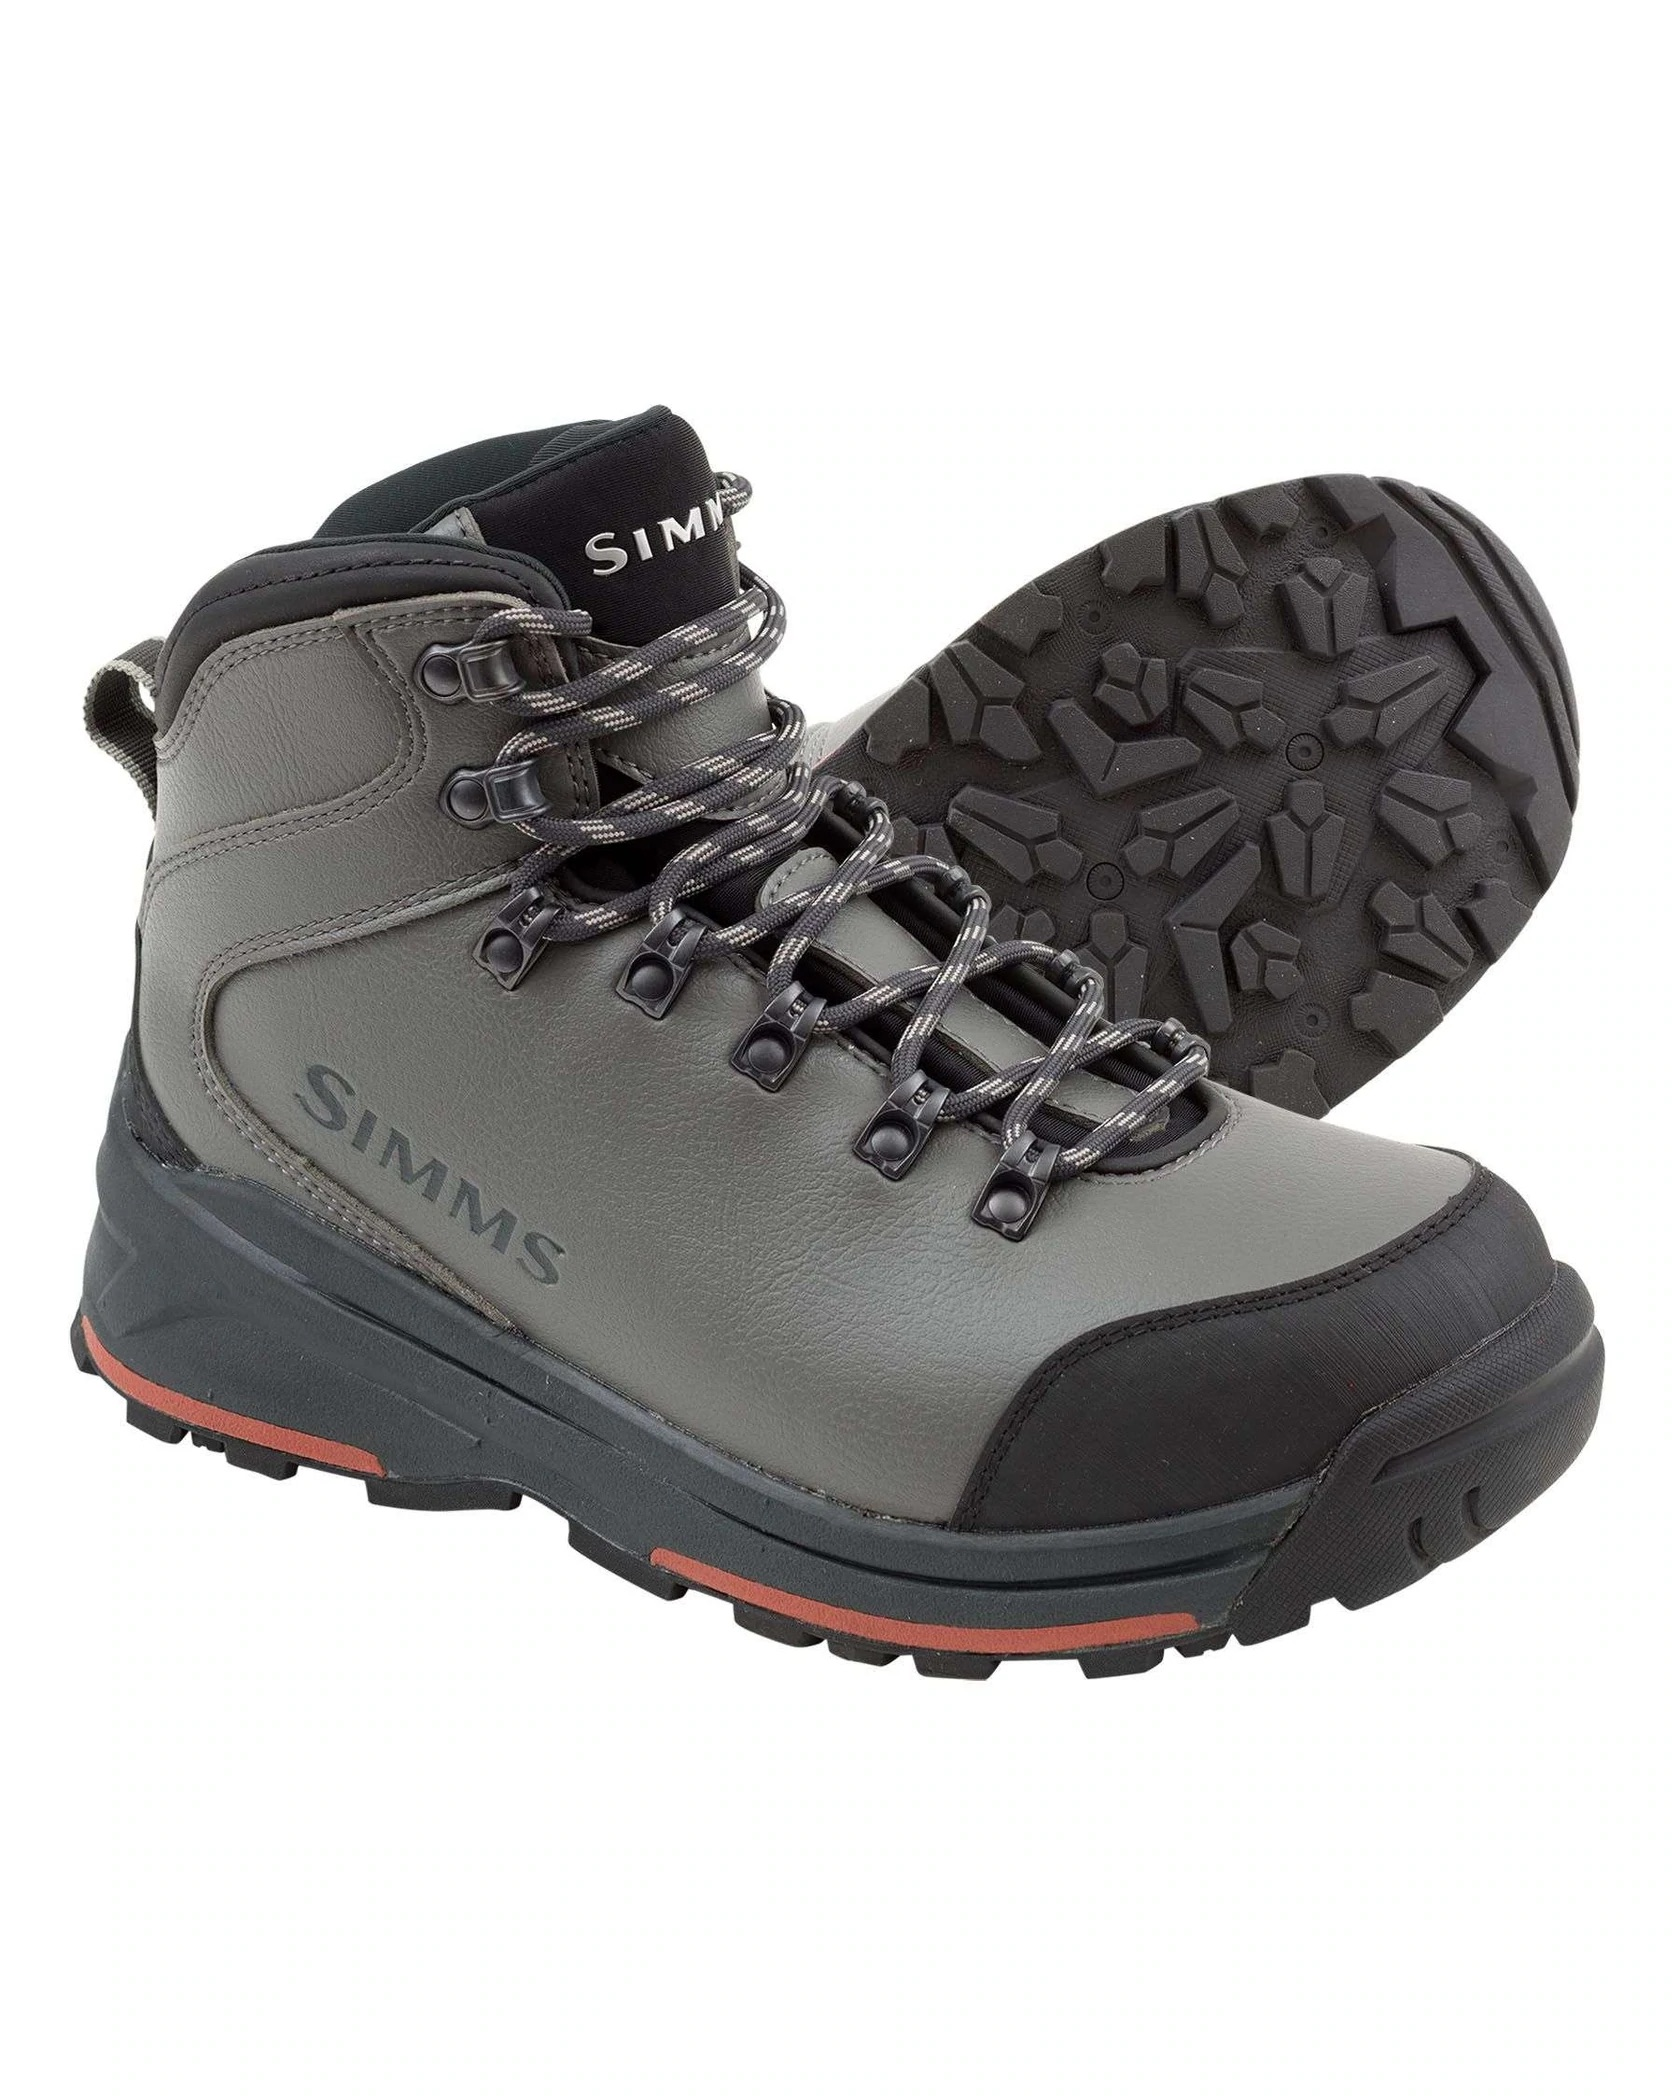 Simms W's Freestone Wading Boot - Rubber - Size 11